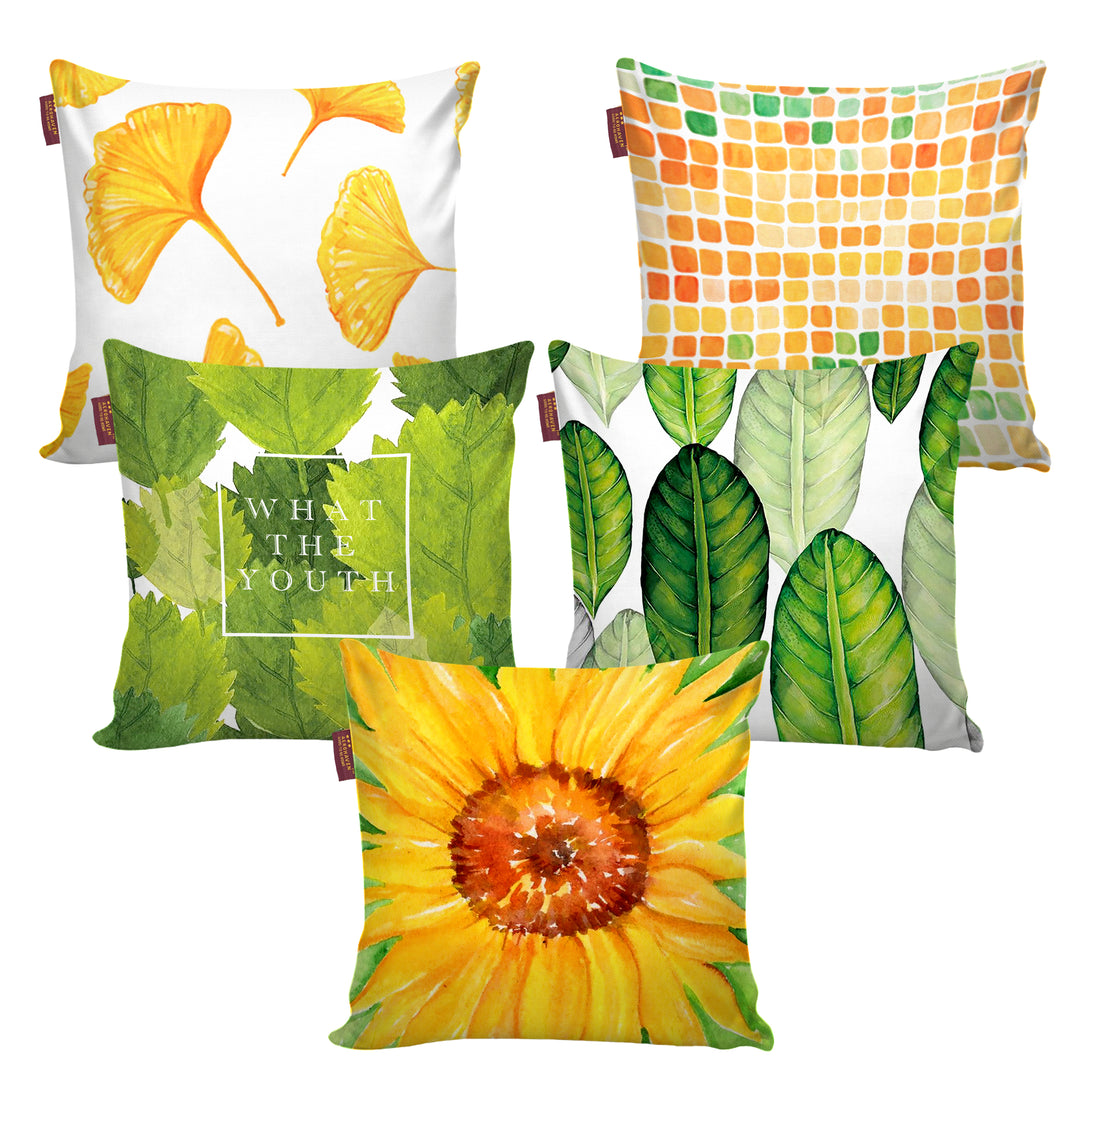 Set of 5 Nature Digital Printed Throw Pillow/Cushion Covers